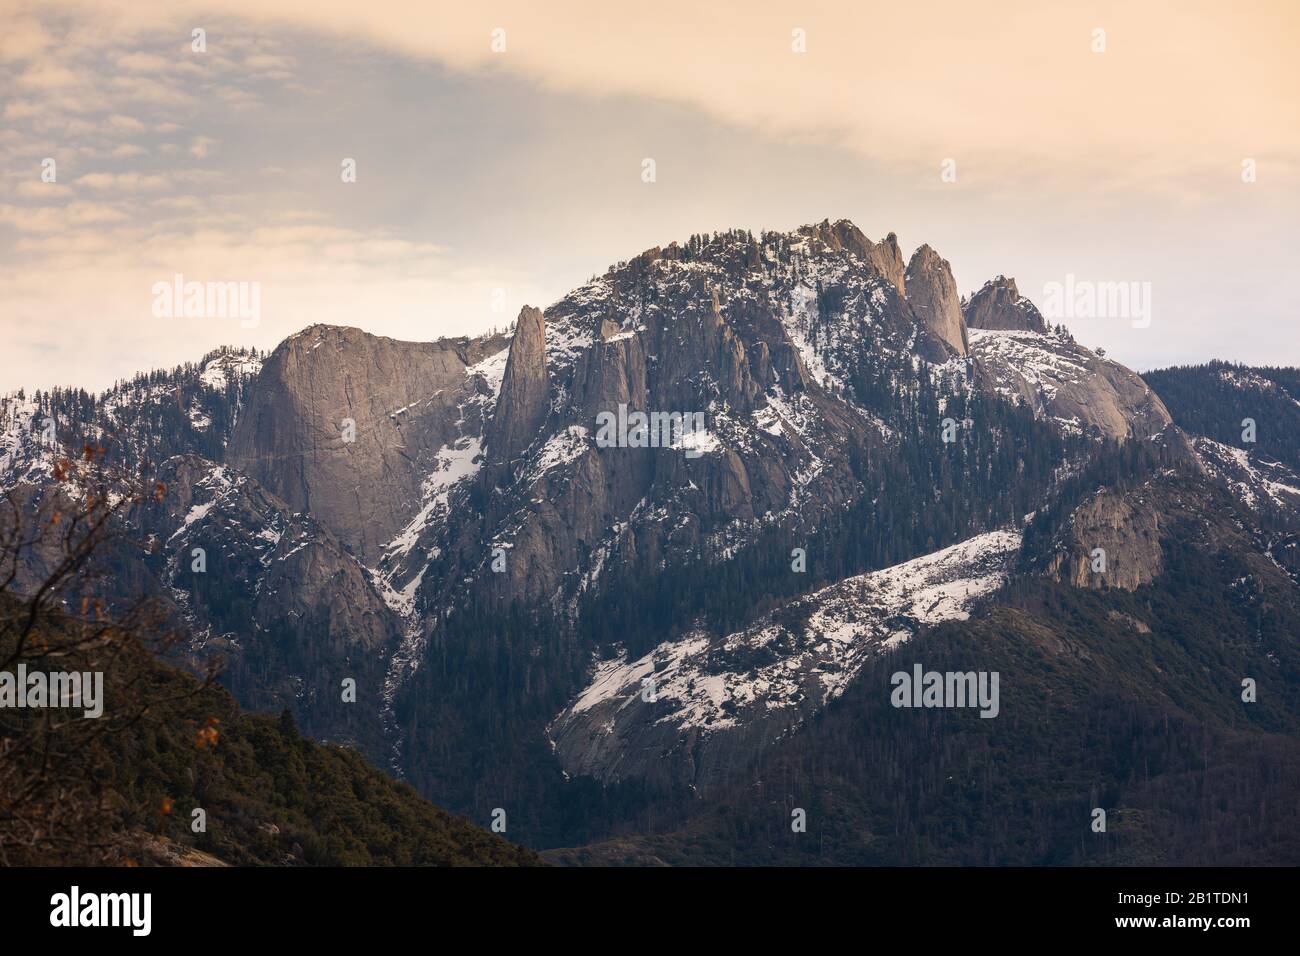 Castle Rocks North mountains at Sequoia and Kings Canyon National Park in California, United States. Stock Photo